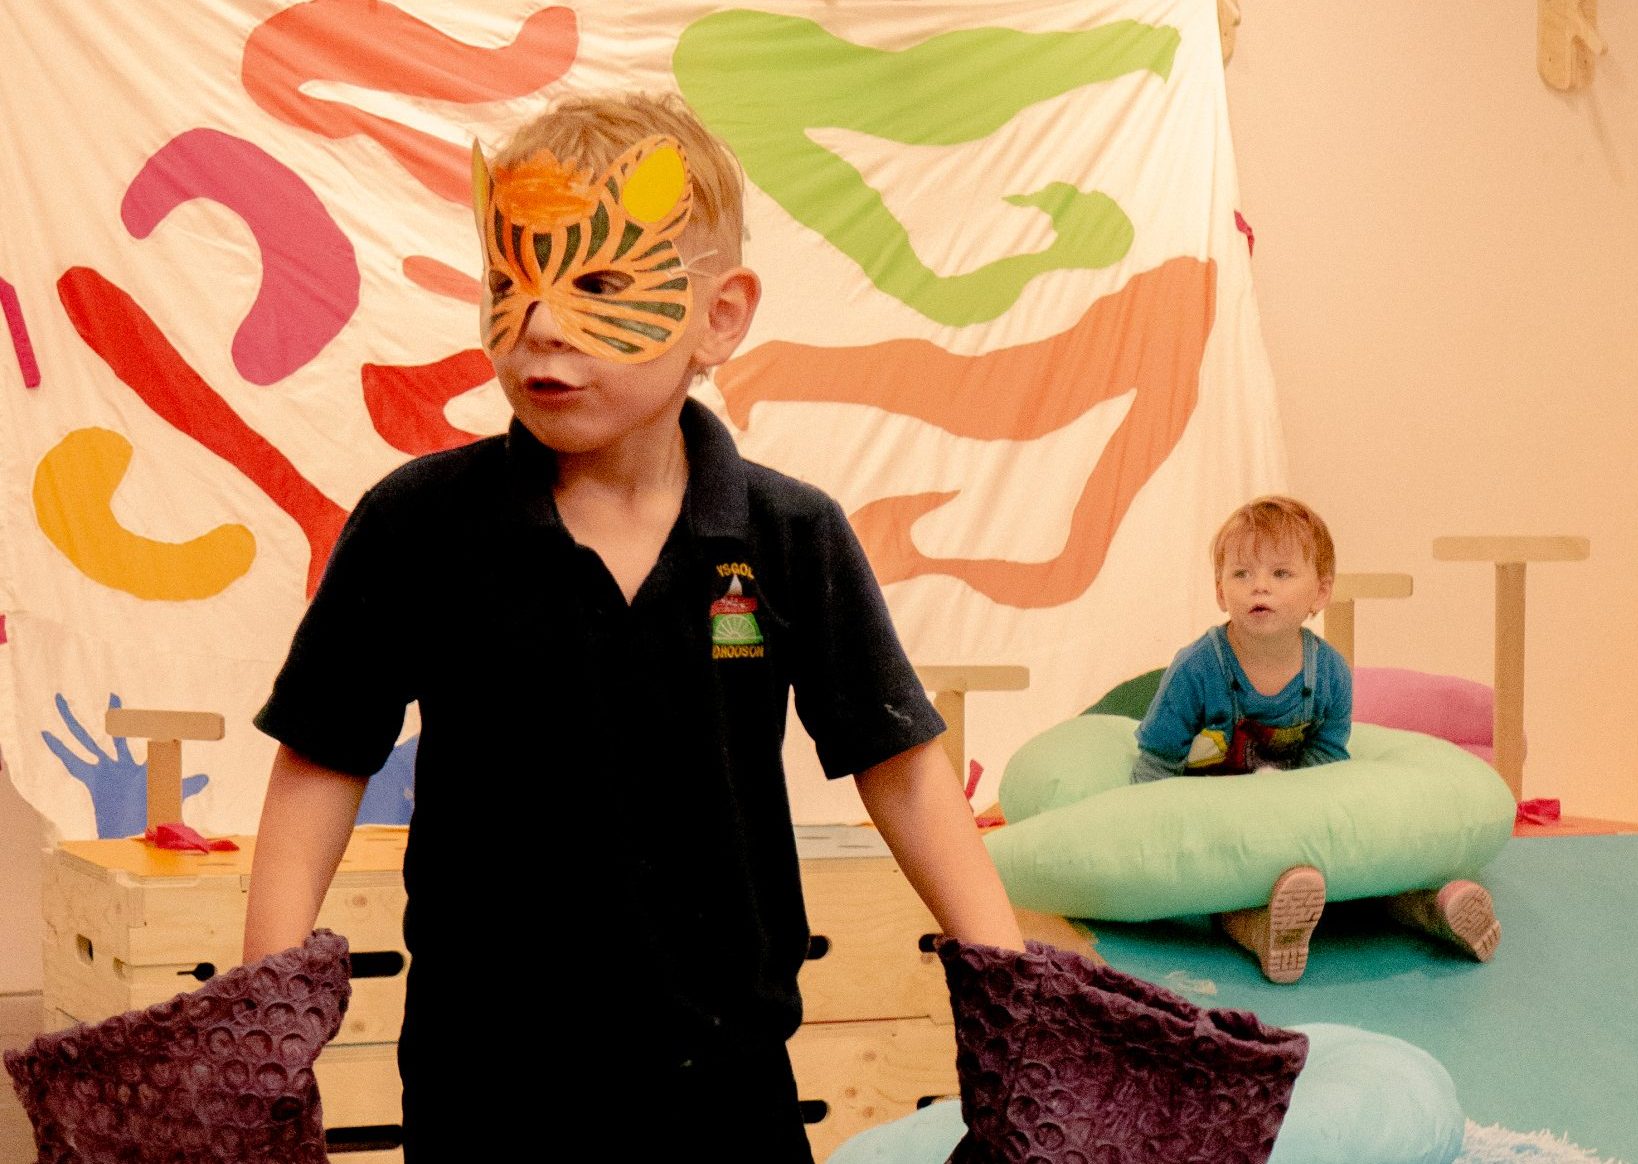 A child wearing a tiger mask, surrounded by colourful soft toys/artworks designed by Ella Jones. A toddler can be seen sitting in the background.